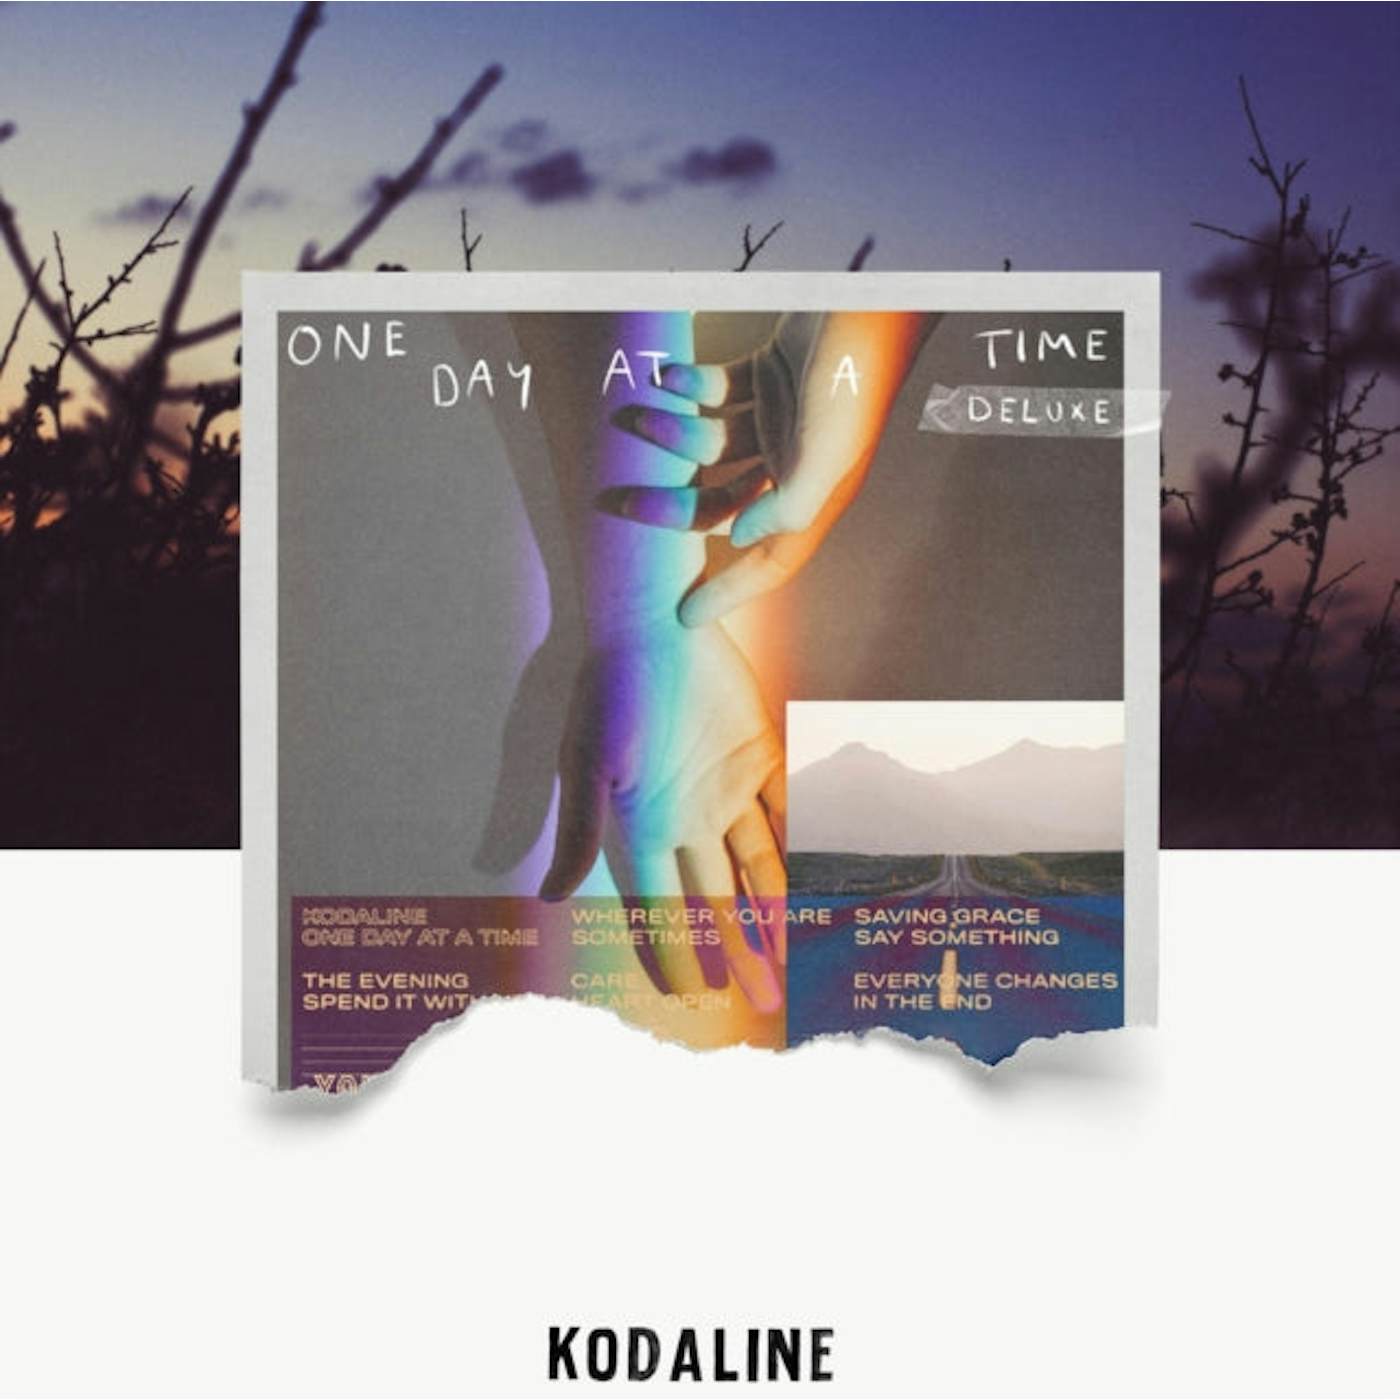 Kodaline LP - One Day At A Time (Deluxe) (Vinyl)